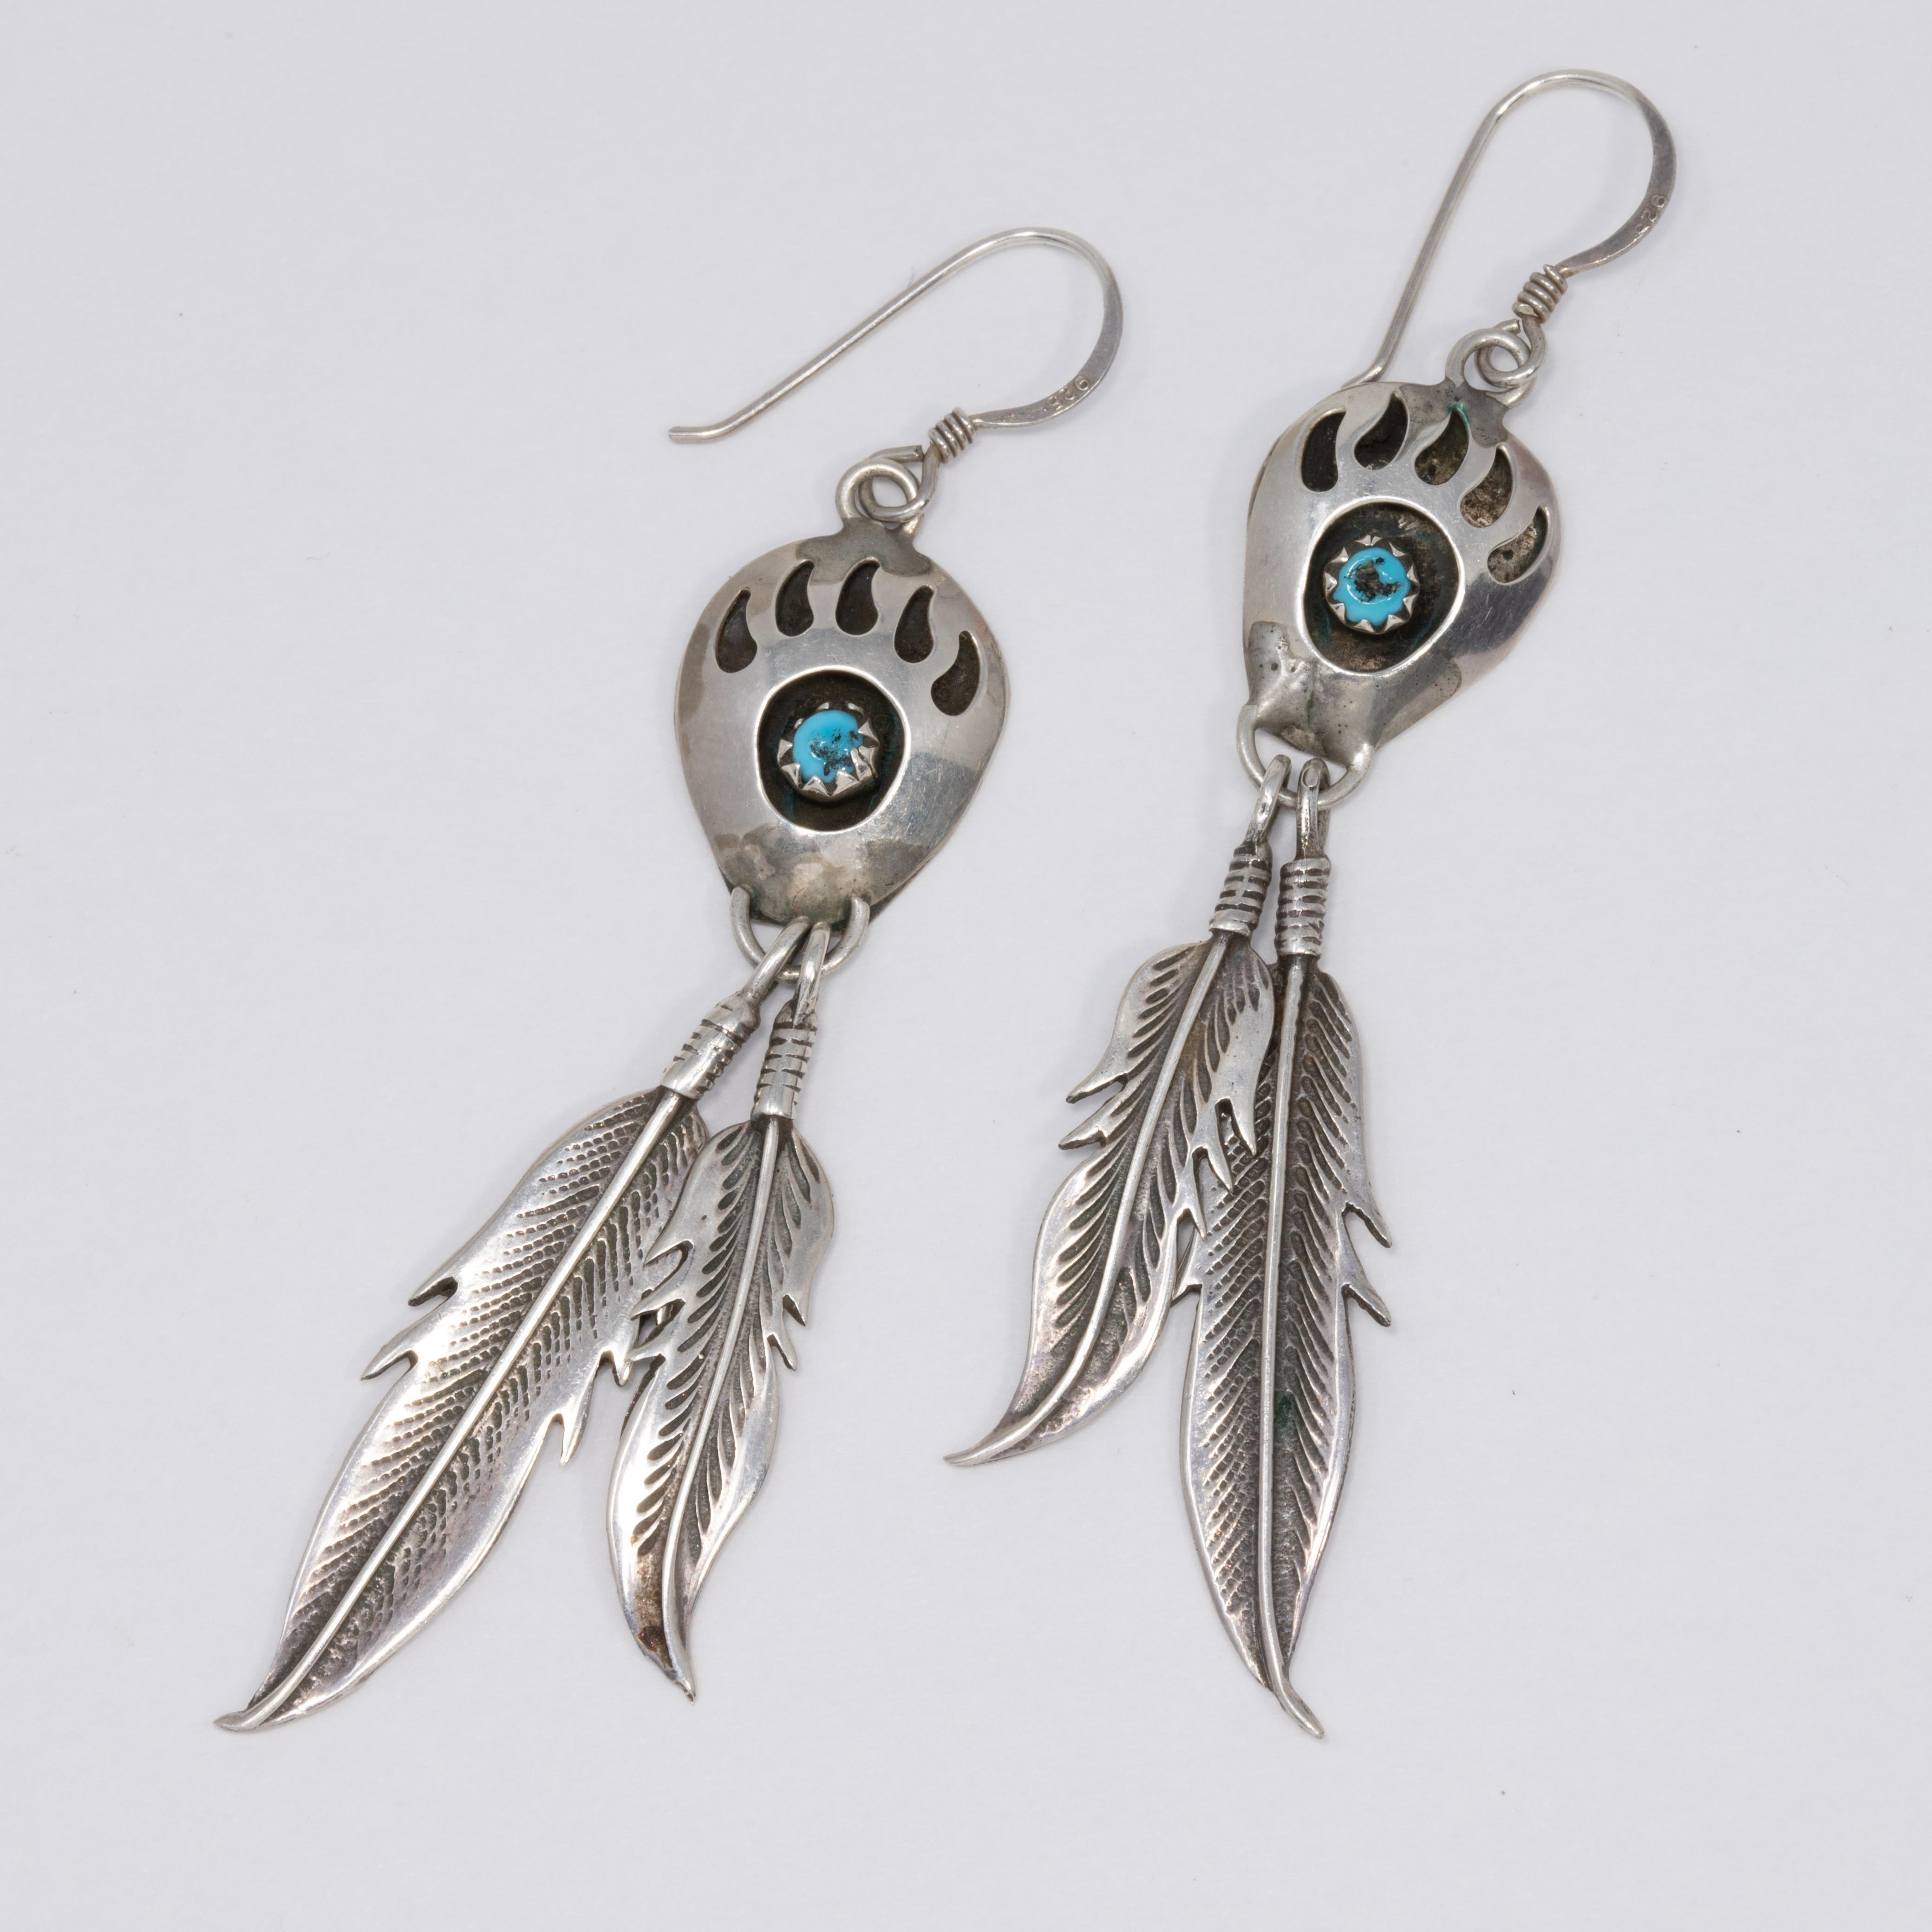 A vintage pair of Native American sterling silver earrings. Each earring features a raised bear claw motif, accented with a turquoise cabochon set in a sawtooth bezel. Two feathers hang off the bottom for a unique touch. Excellent Native American